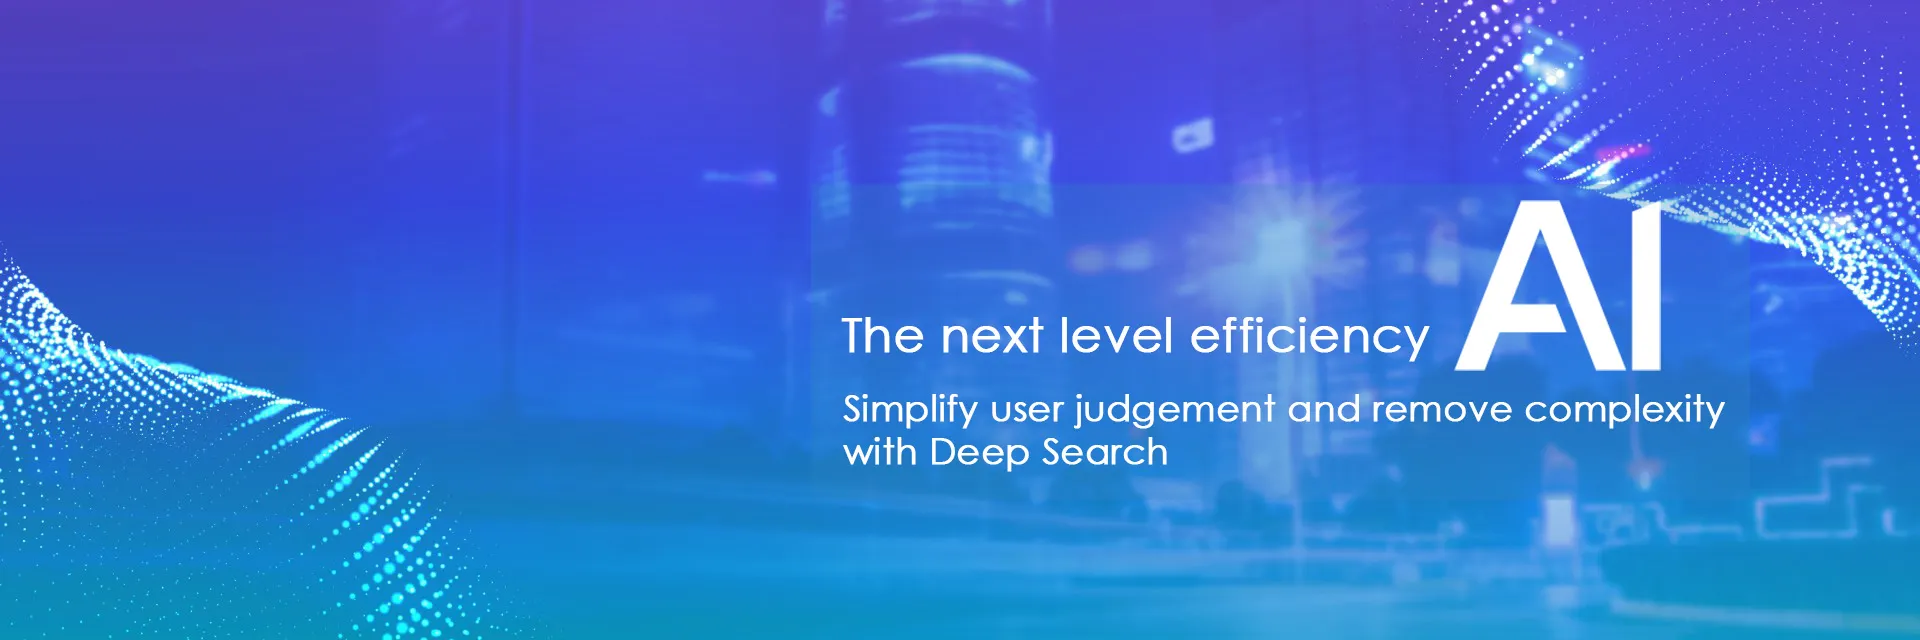 Deep-Search-With-AI